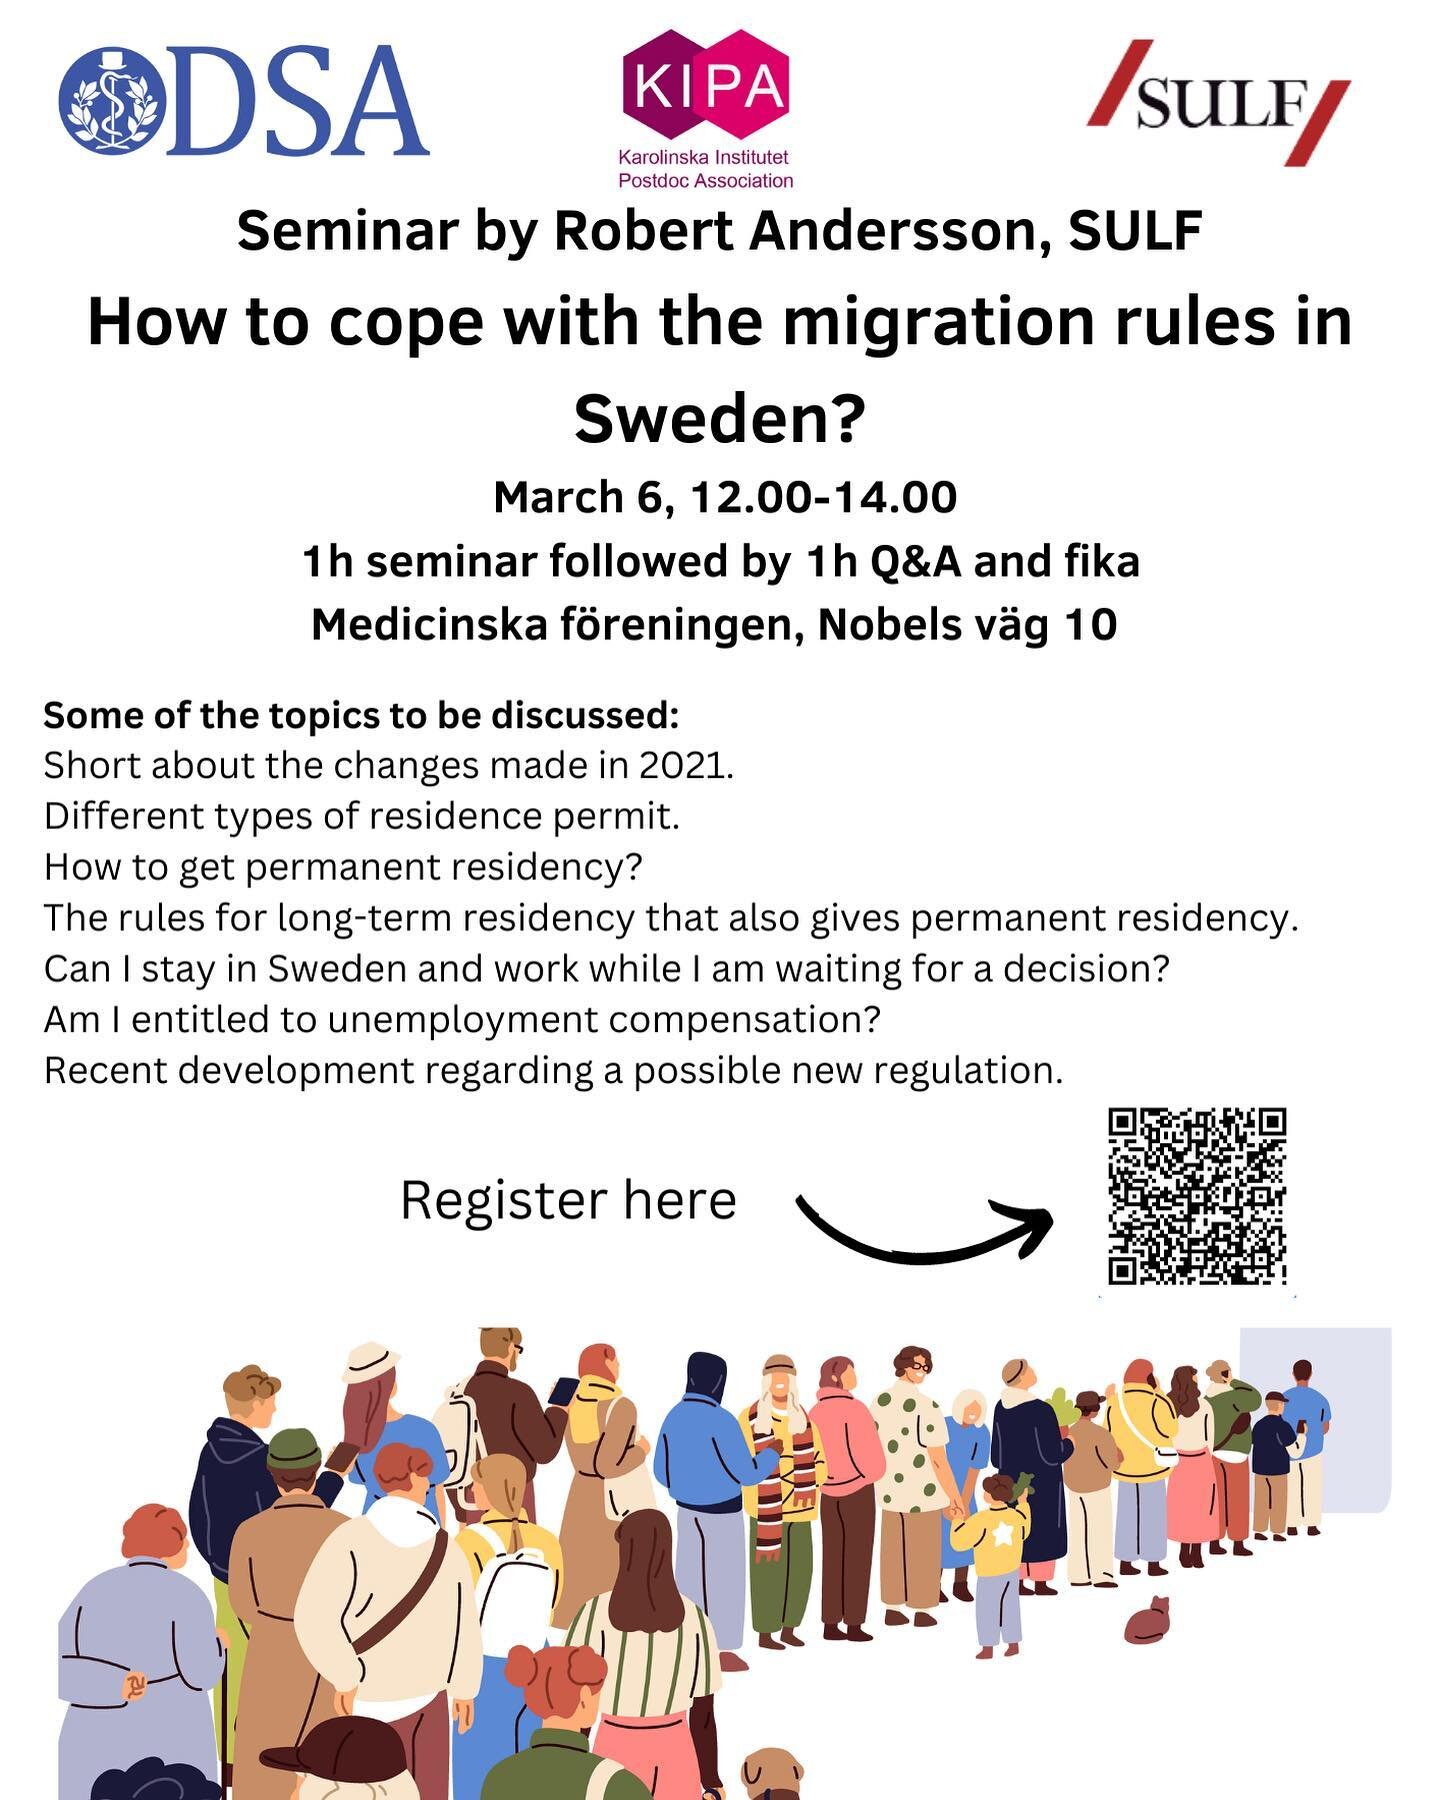 @dsa.karolinska, SULF and KIPA are co-hosting an informative talk on how handle/plan permit applications based on the new migration rules for PhD students/researchers. Register here - https://tinyurl.com/bd2xsbpp

Topic: Handling permit applications 